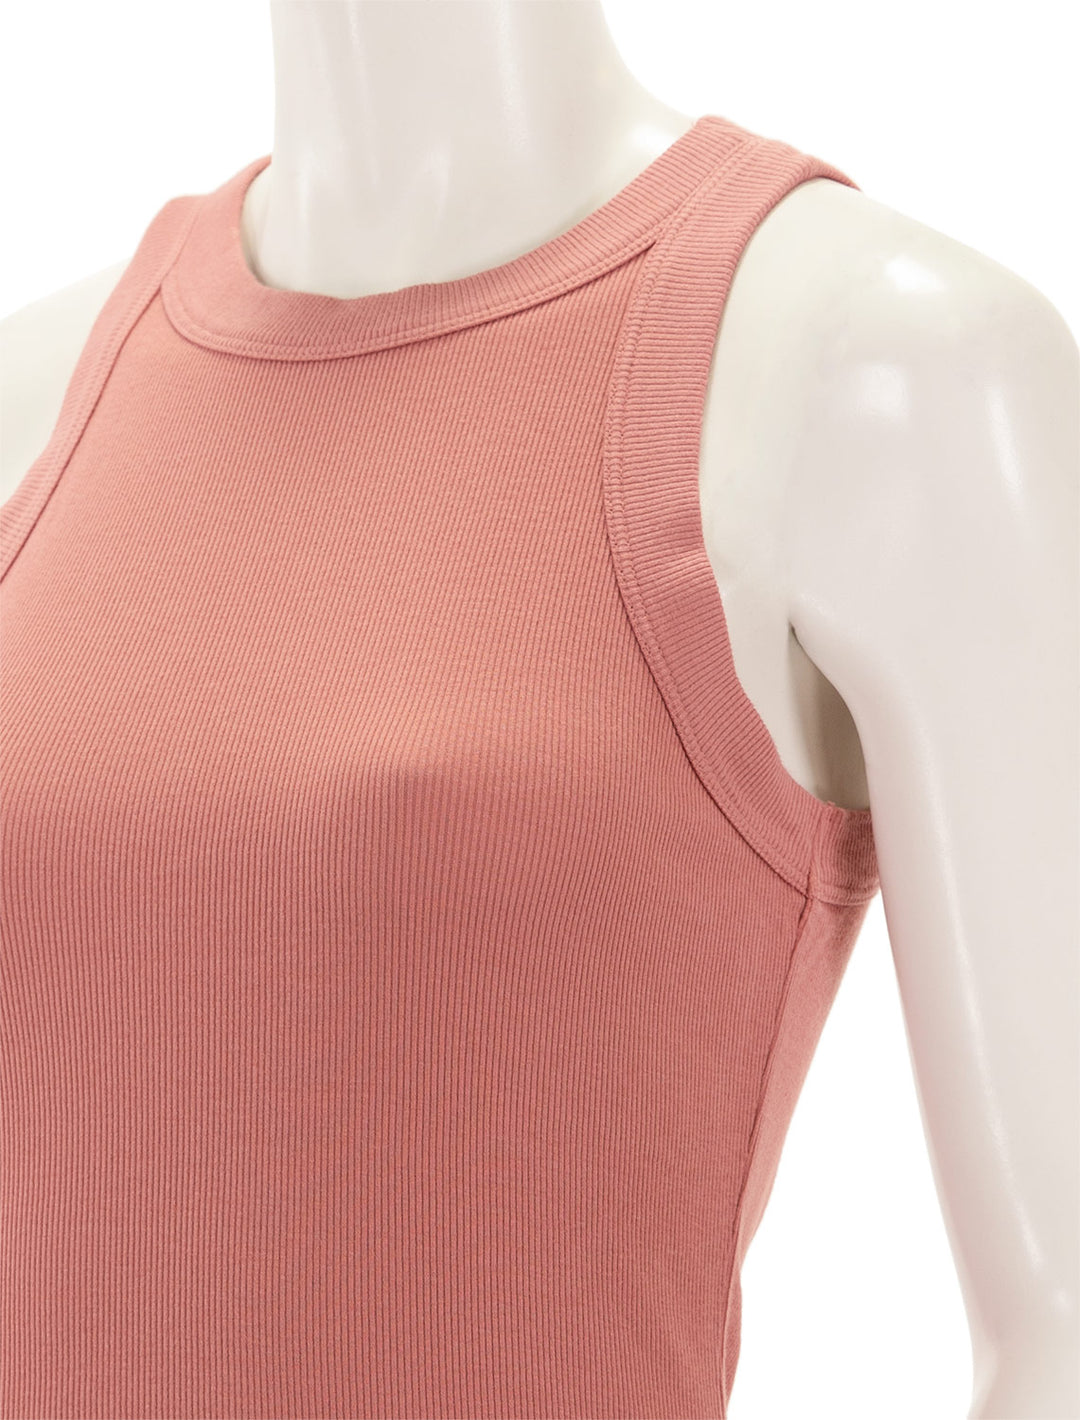 Close-up view of Sundays NYC's turner tank in dusty rose.